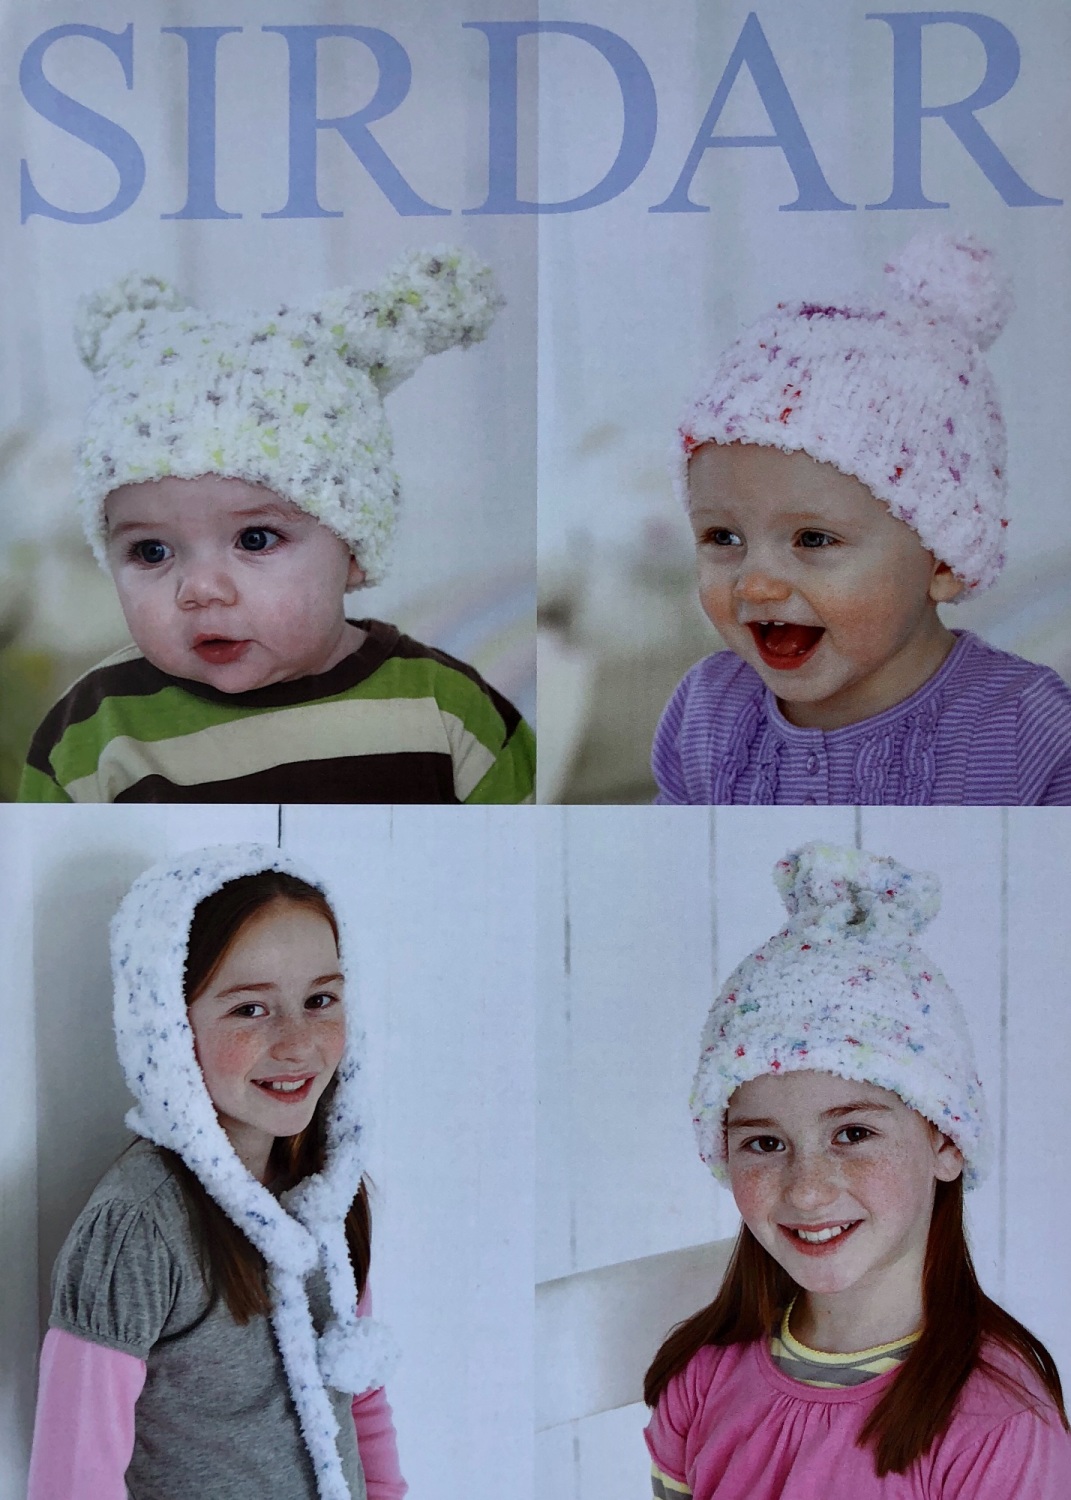 Sirdar pattern: Hats in Sirdar Snuggly Snowflake Chunky. Leaflet 4698 ( Kni